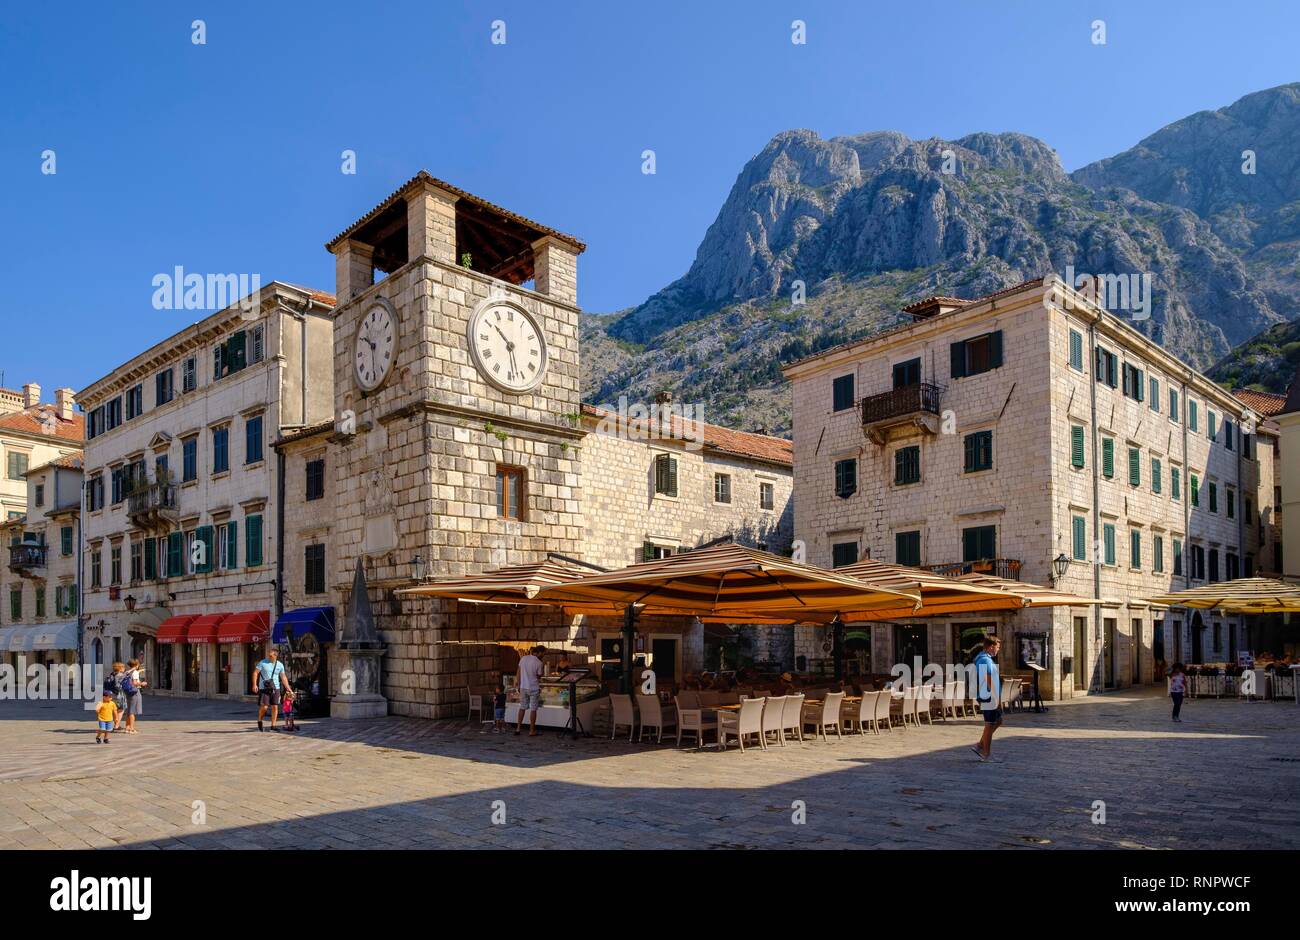 Main square with clock tower, old town Kotor, Montenegro Stock Photo